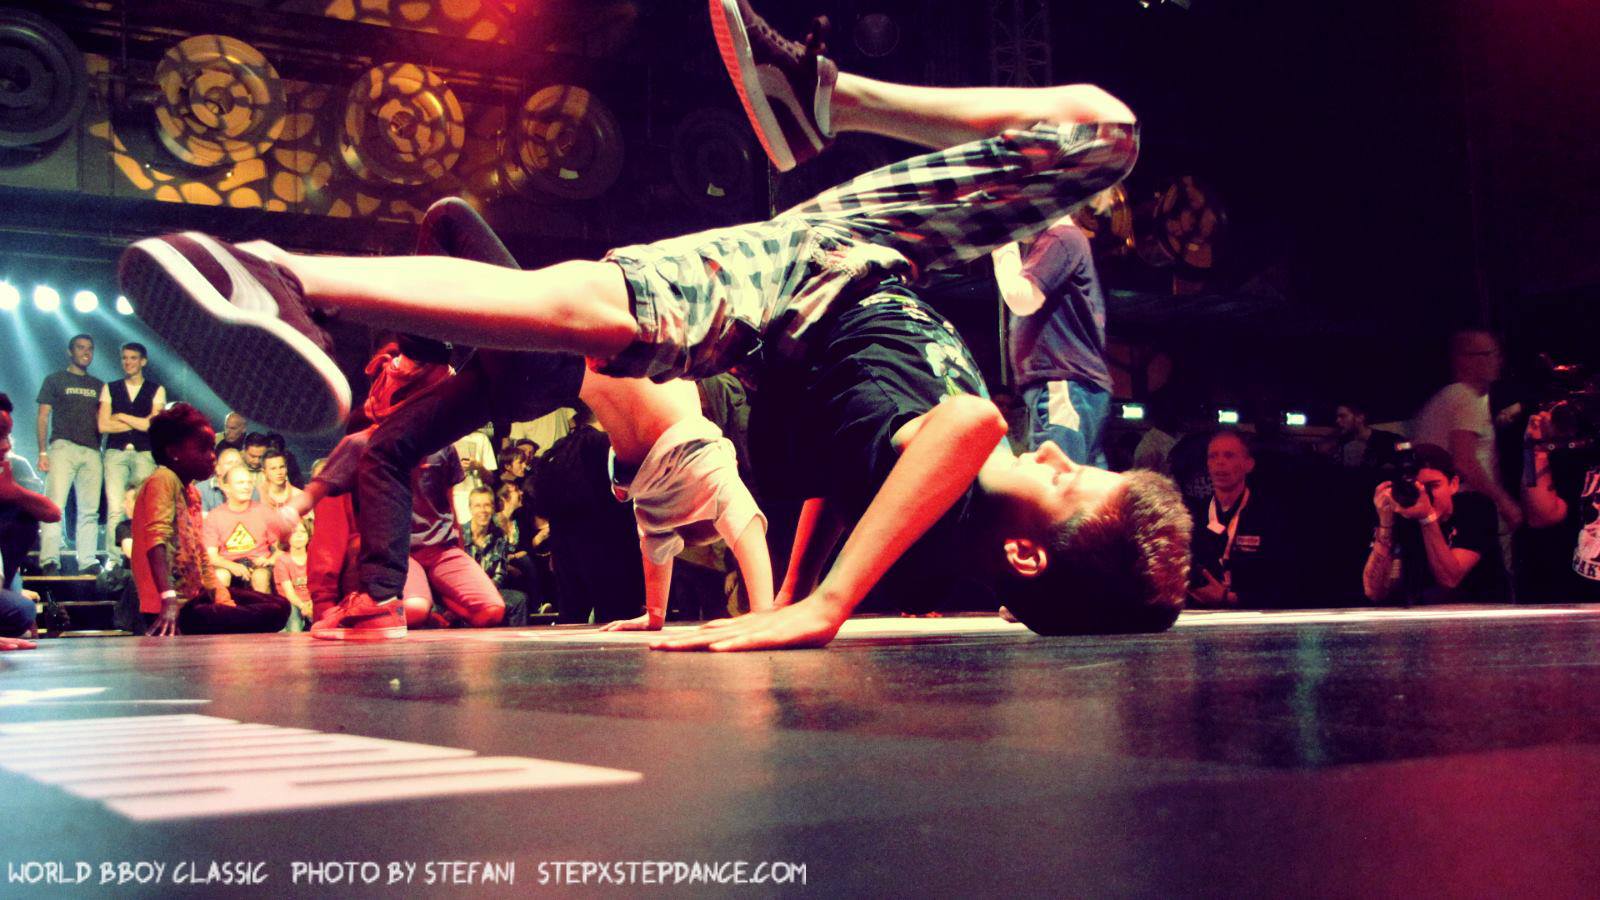 Free download Bboy Wallpaper 2013 Red bull bc one 2013 today [1600x900] for your Desktop, Mobile & Tablet. Explore Bboy Wallpaper. Bboy Wallpaper, Bboy Wallpaper, Bboy Wallpaper 2015